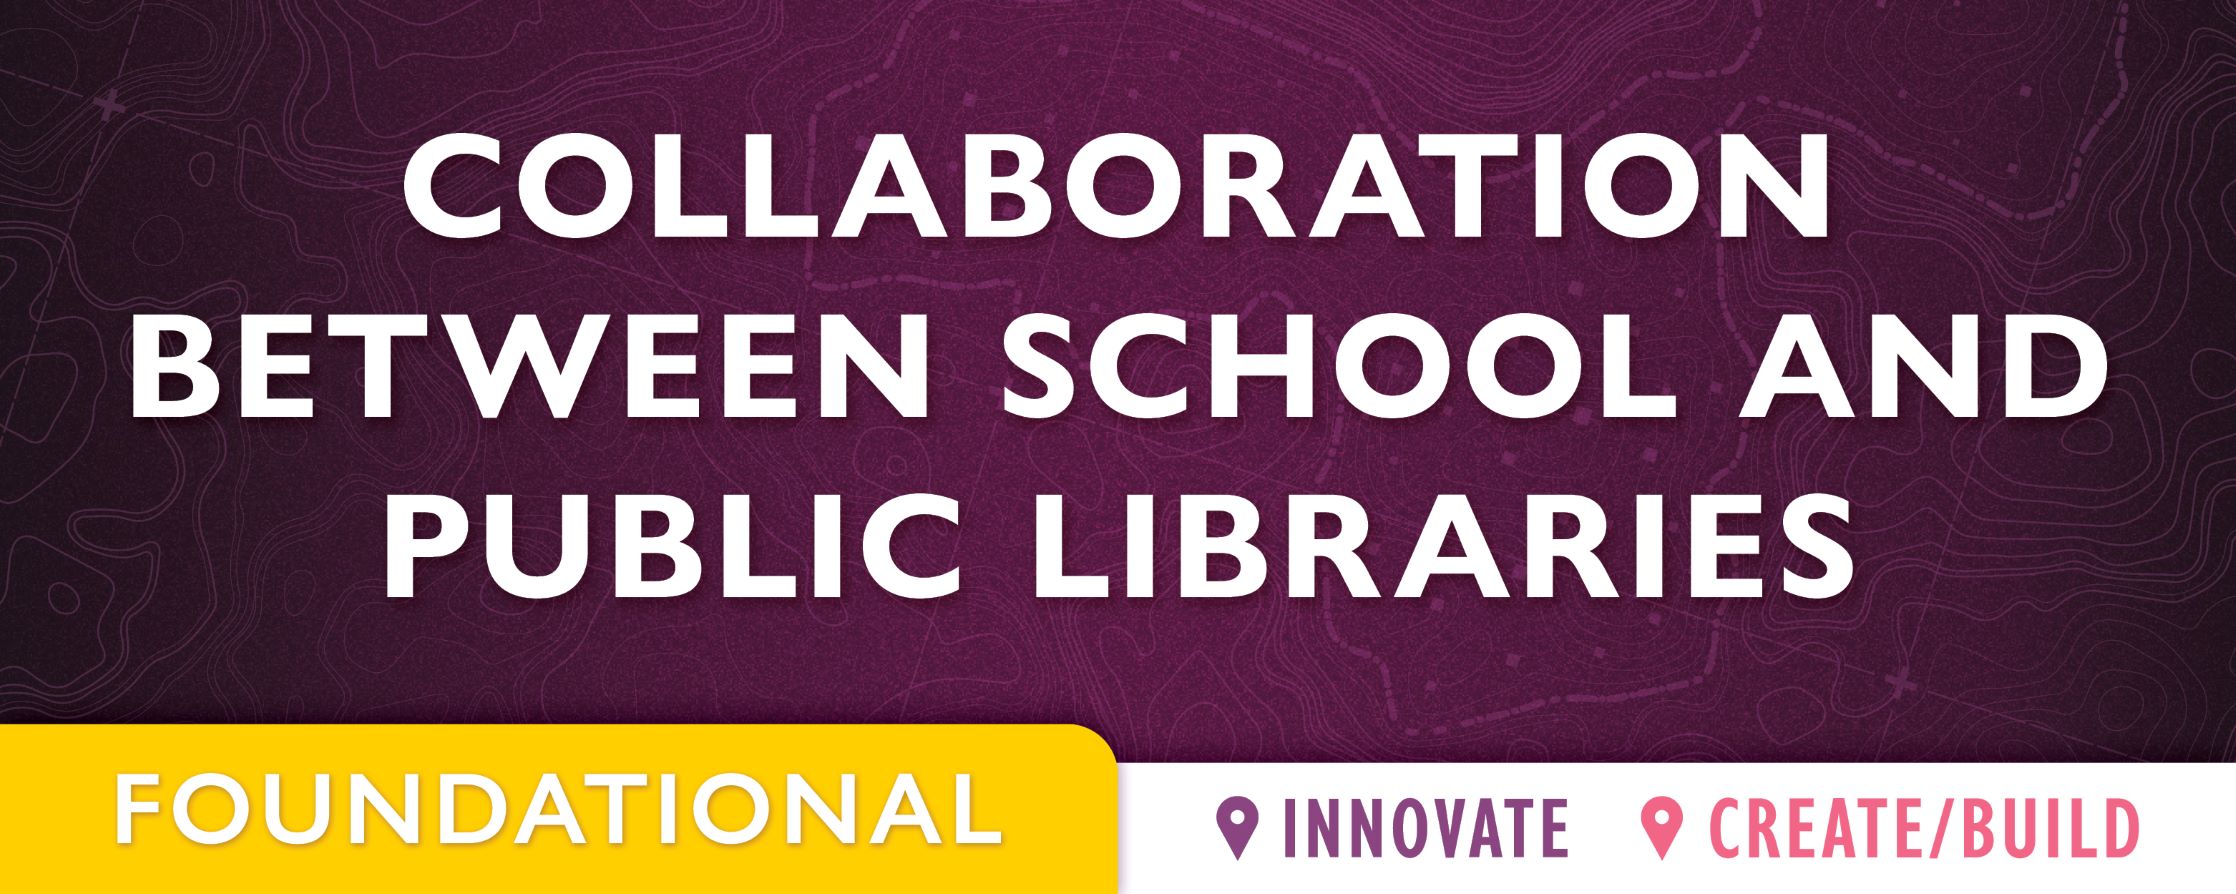 purple background with text: Collaboration Between School and Public Libraries 